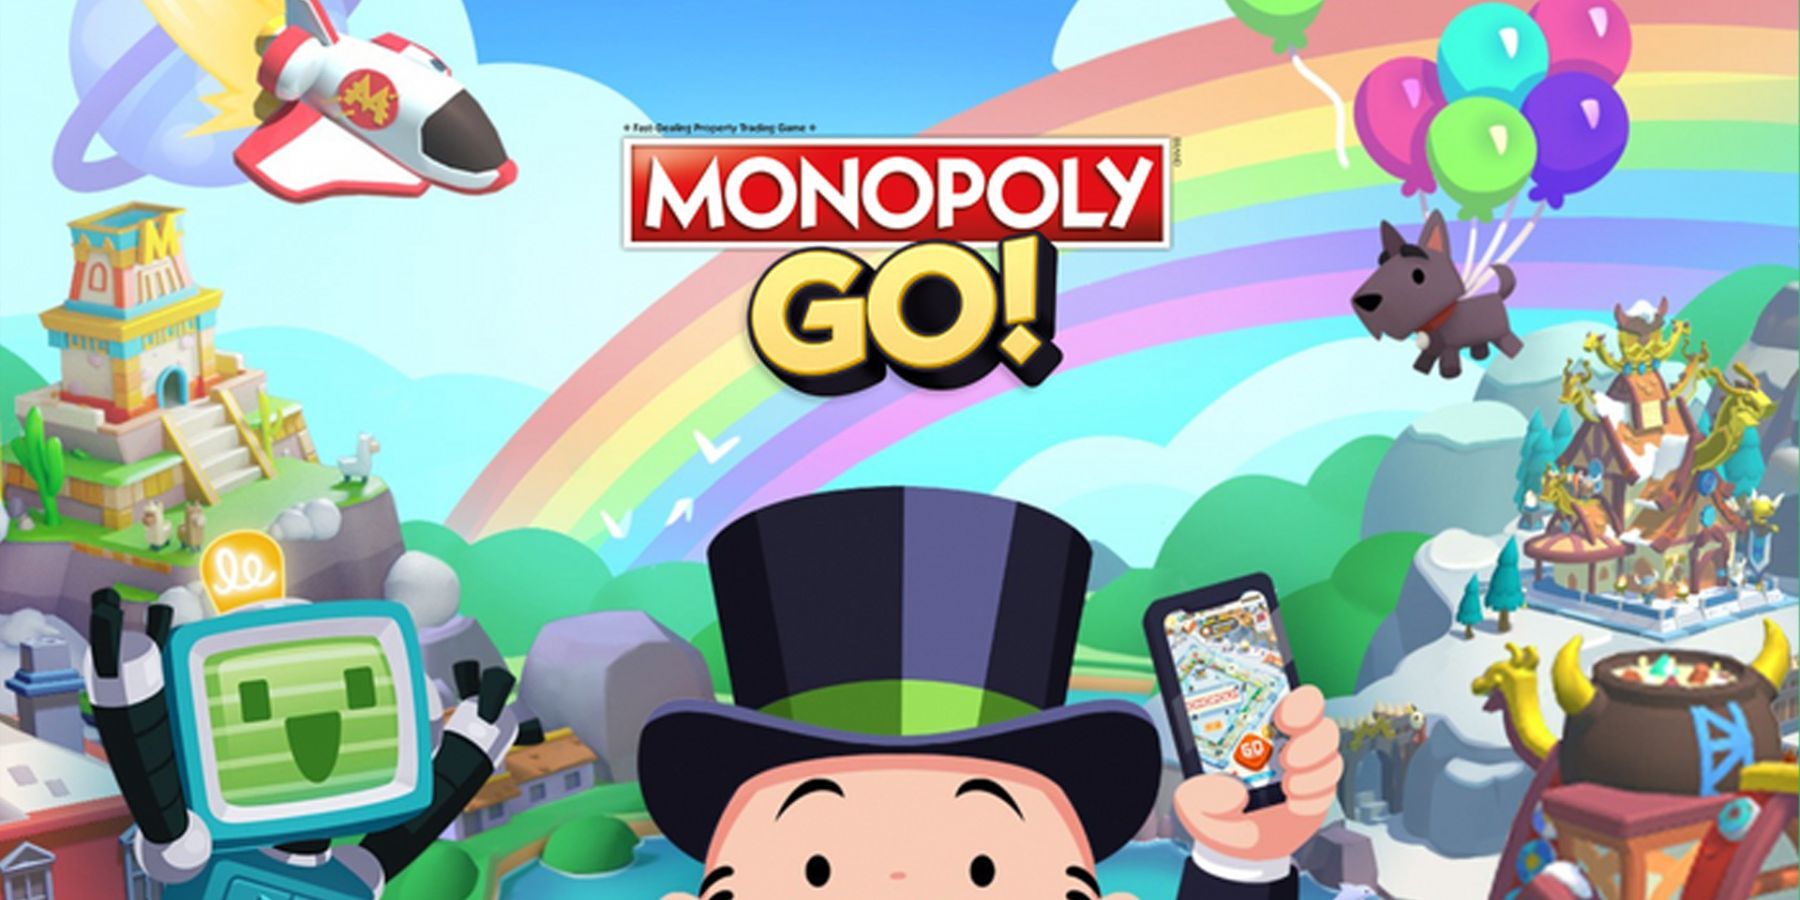 An image of multiple Monopoly GO characters beneath a logo